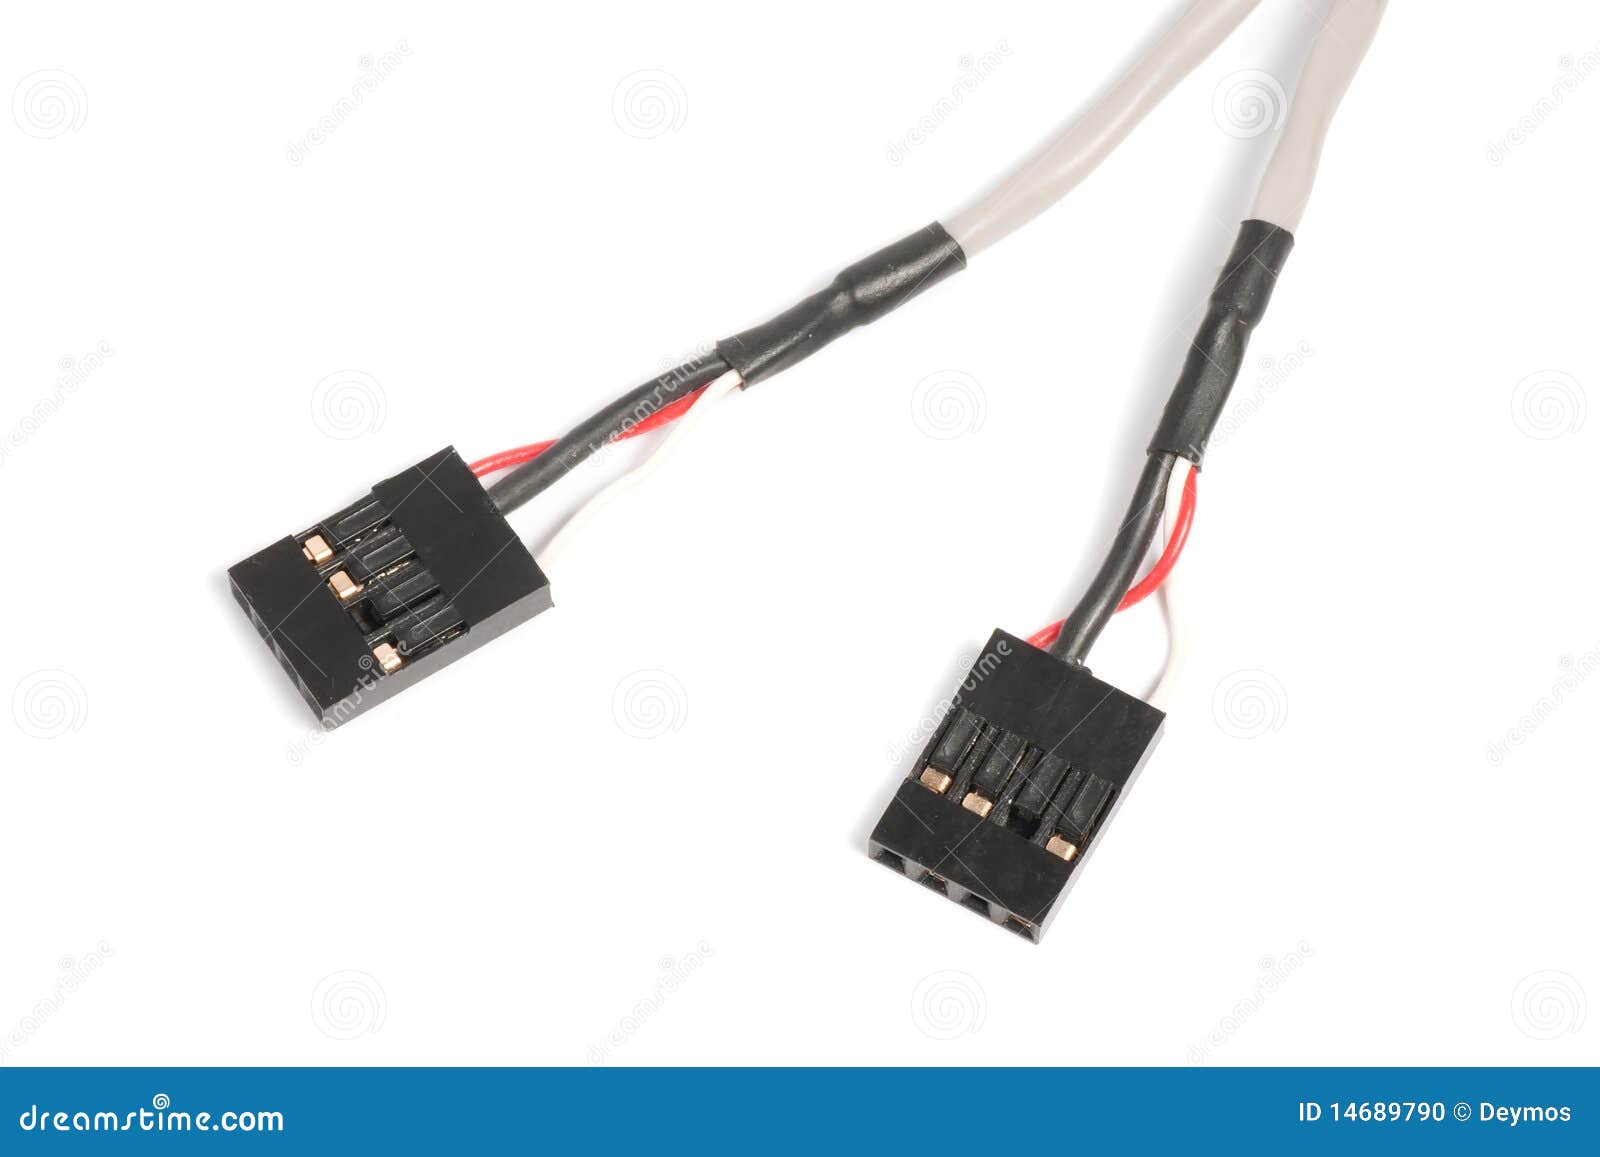 4-pin-cd-dvd-audio-connector-cable-14689790.jpg